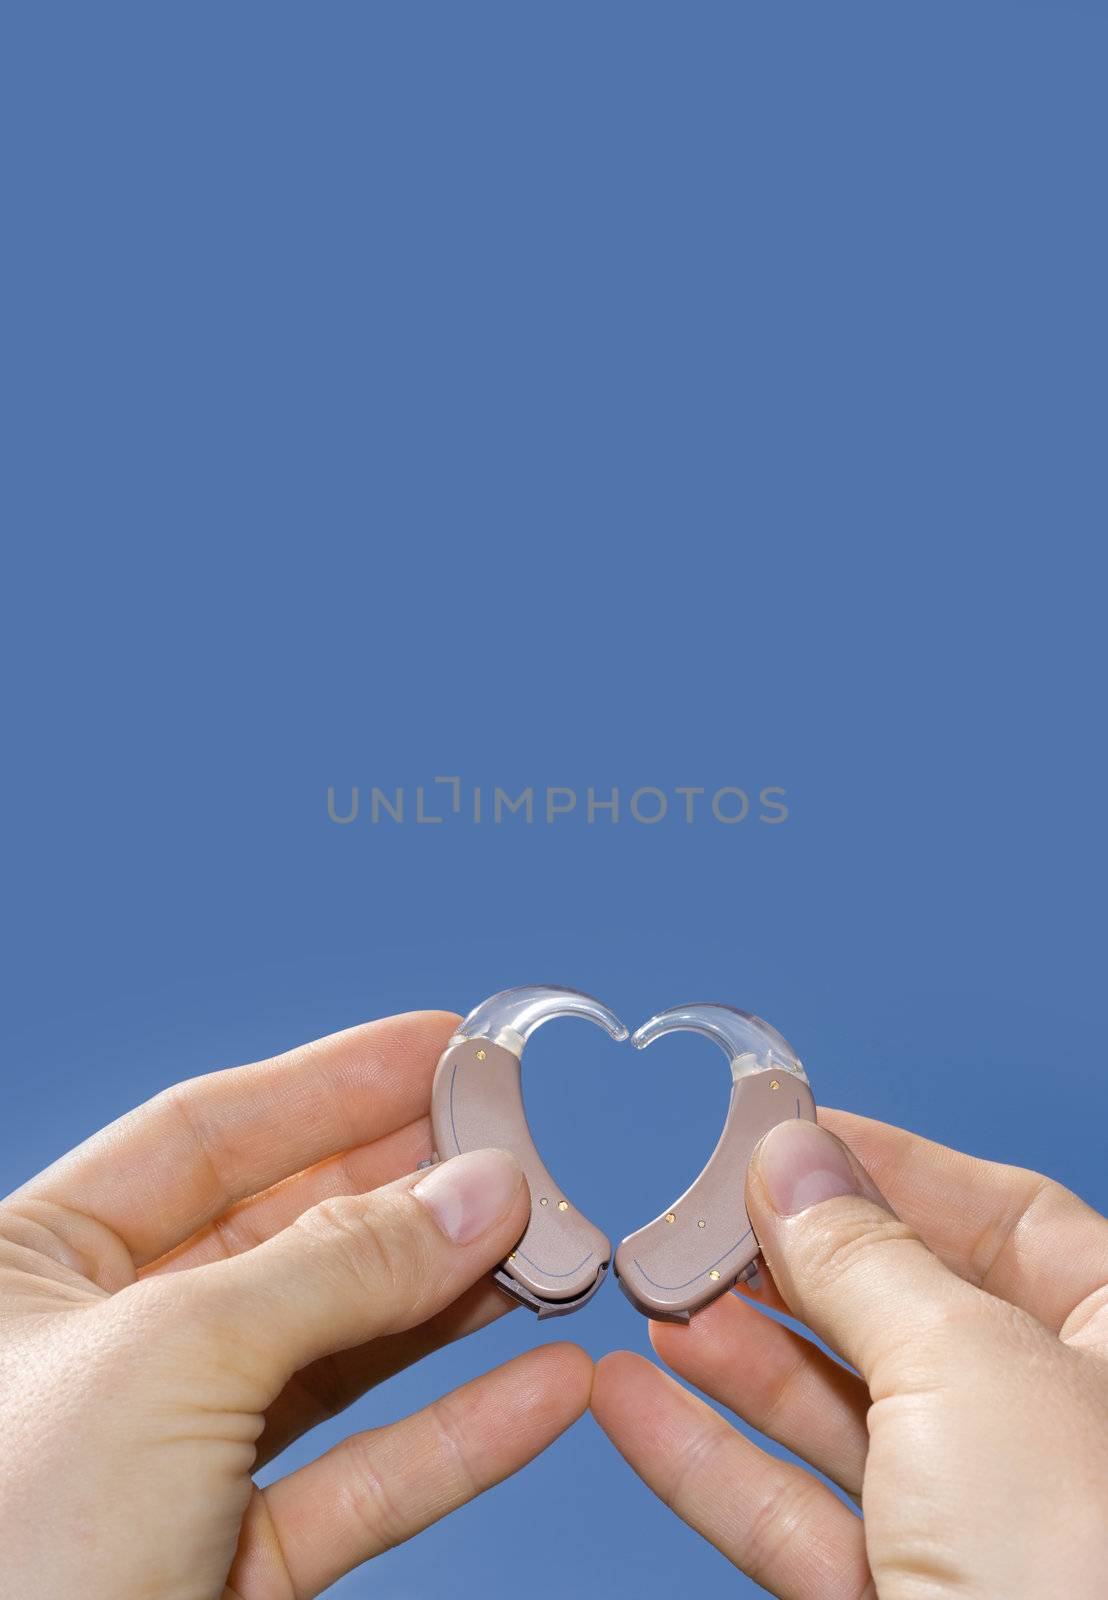 Hands showing a heart shape from digital hearing aids in fron of a blue sky background useful for text